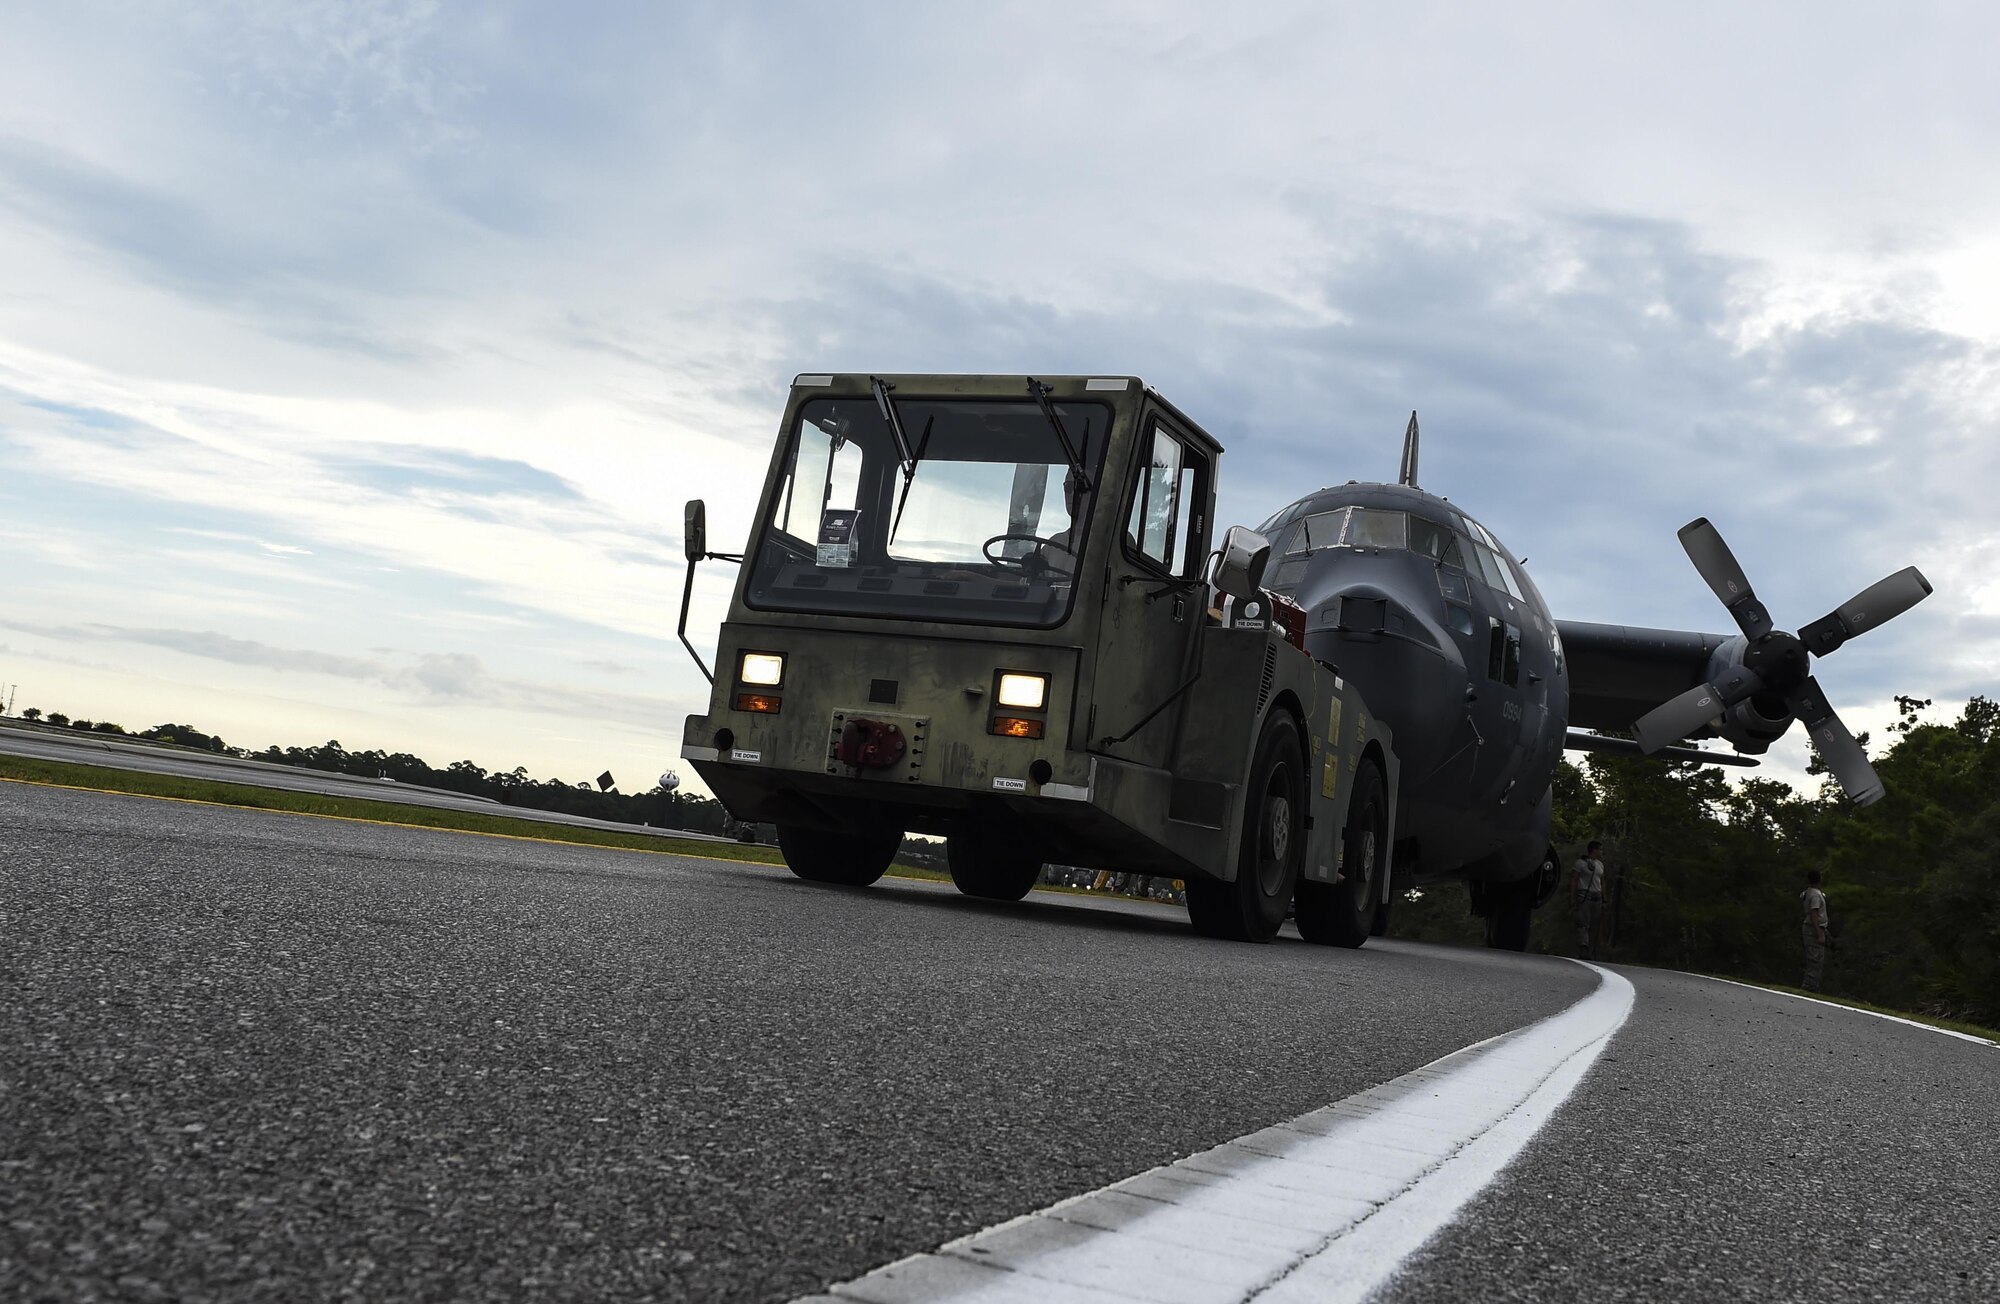 An MC-130P Combat Shadow is towed down Independence Road, Aug. 15, 2015, on Hurlburt Field, Fla. The Combat Shadow was towed from the flightline and staged for installation in the Hurlburt Field Air Park. The MC-130P fleet was retired May 15, 2015, after more than 25 years of service. The installation process for this aircraft known as “Team Shadow,” is scheduled for completion by Sept. 6, 2015. (U.S. Air Force photo by Airman 1st Class Ryan Conroy/Released) 
